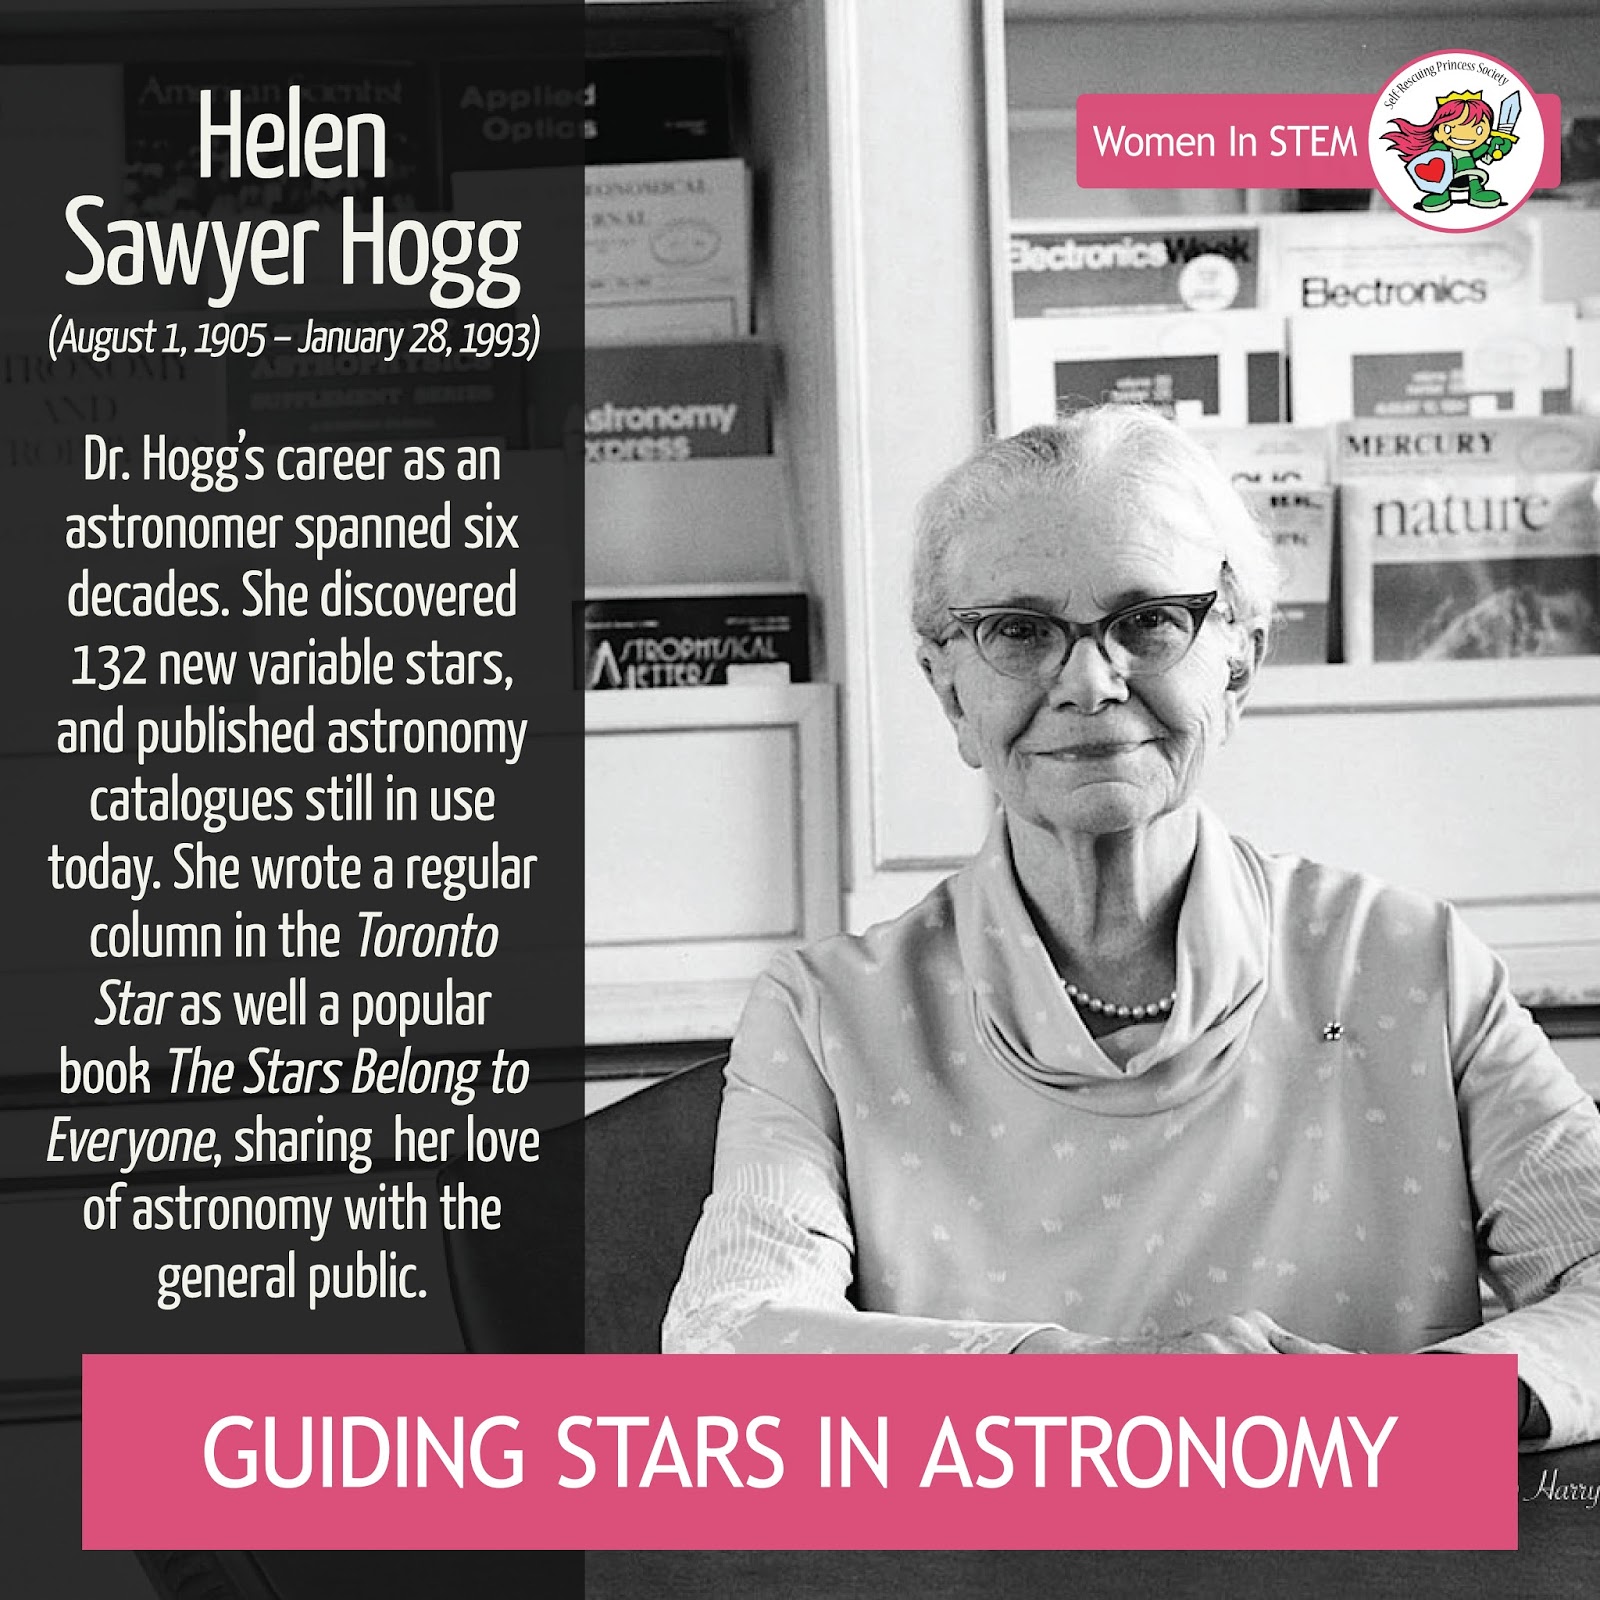 Self-Rescuing Princess Society: Guiding Stars in Astronomy: Helen Sawyer Hogg